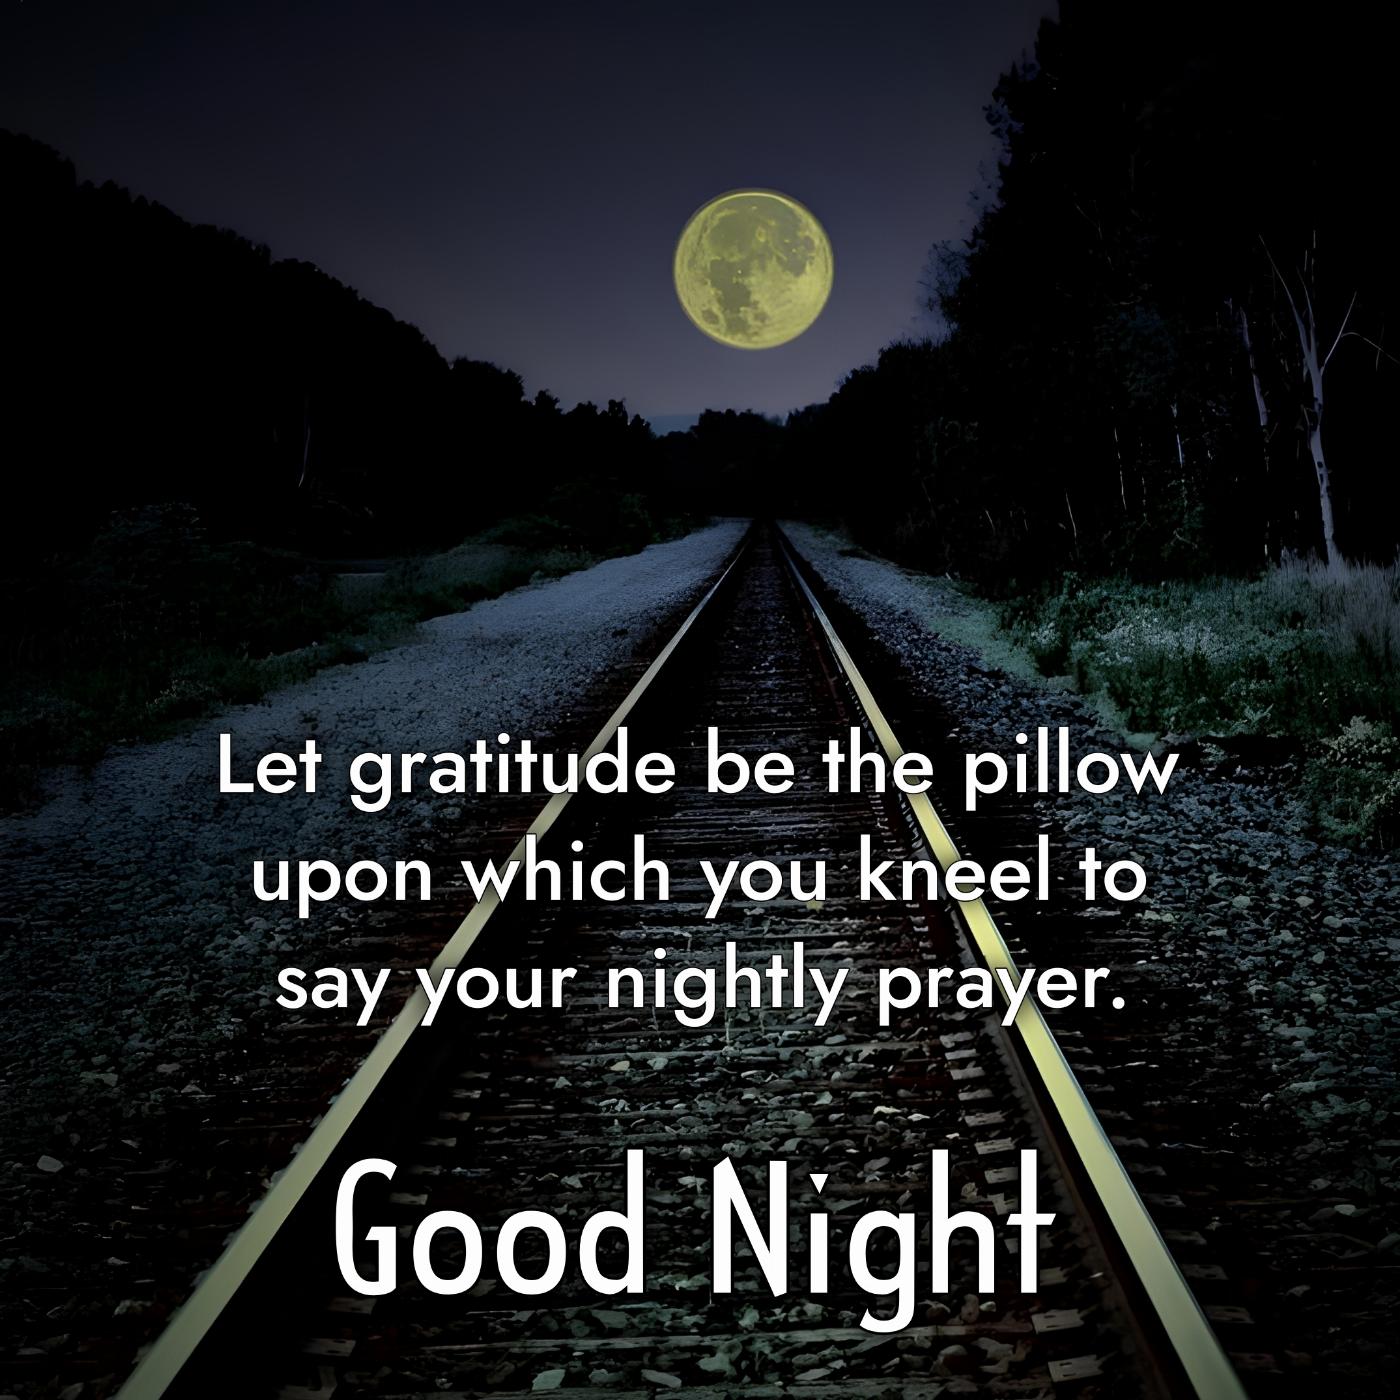 Let gratitude be the pillow upon which you kneel